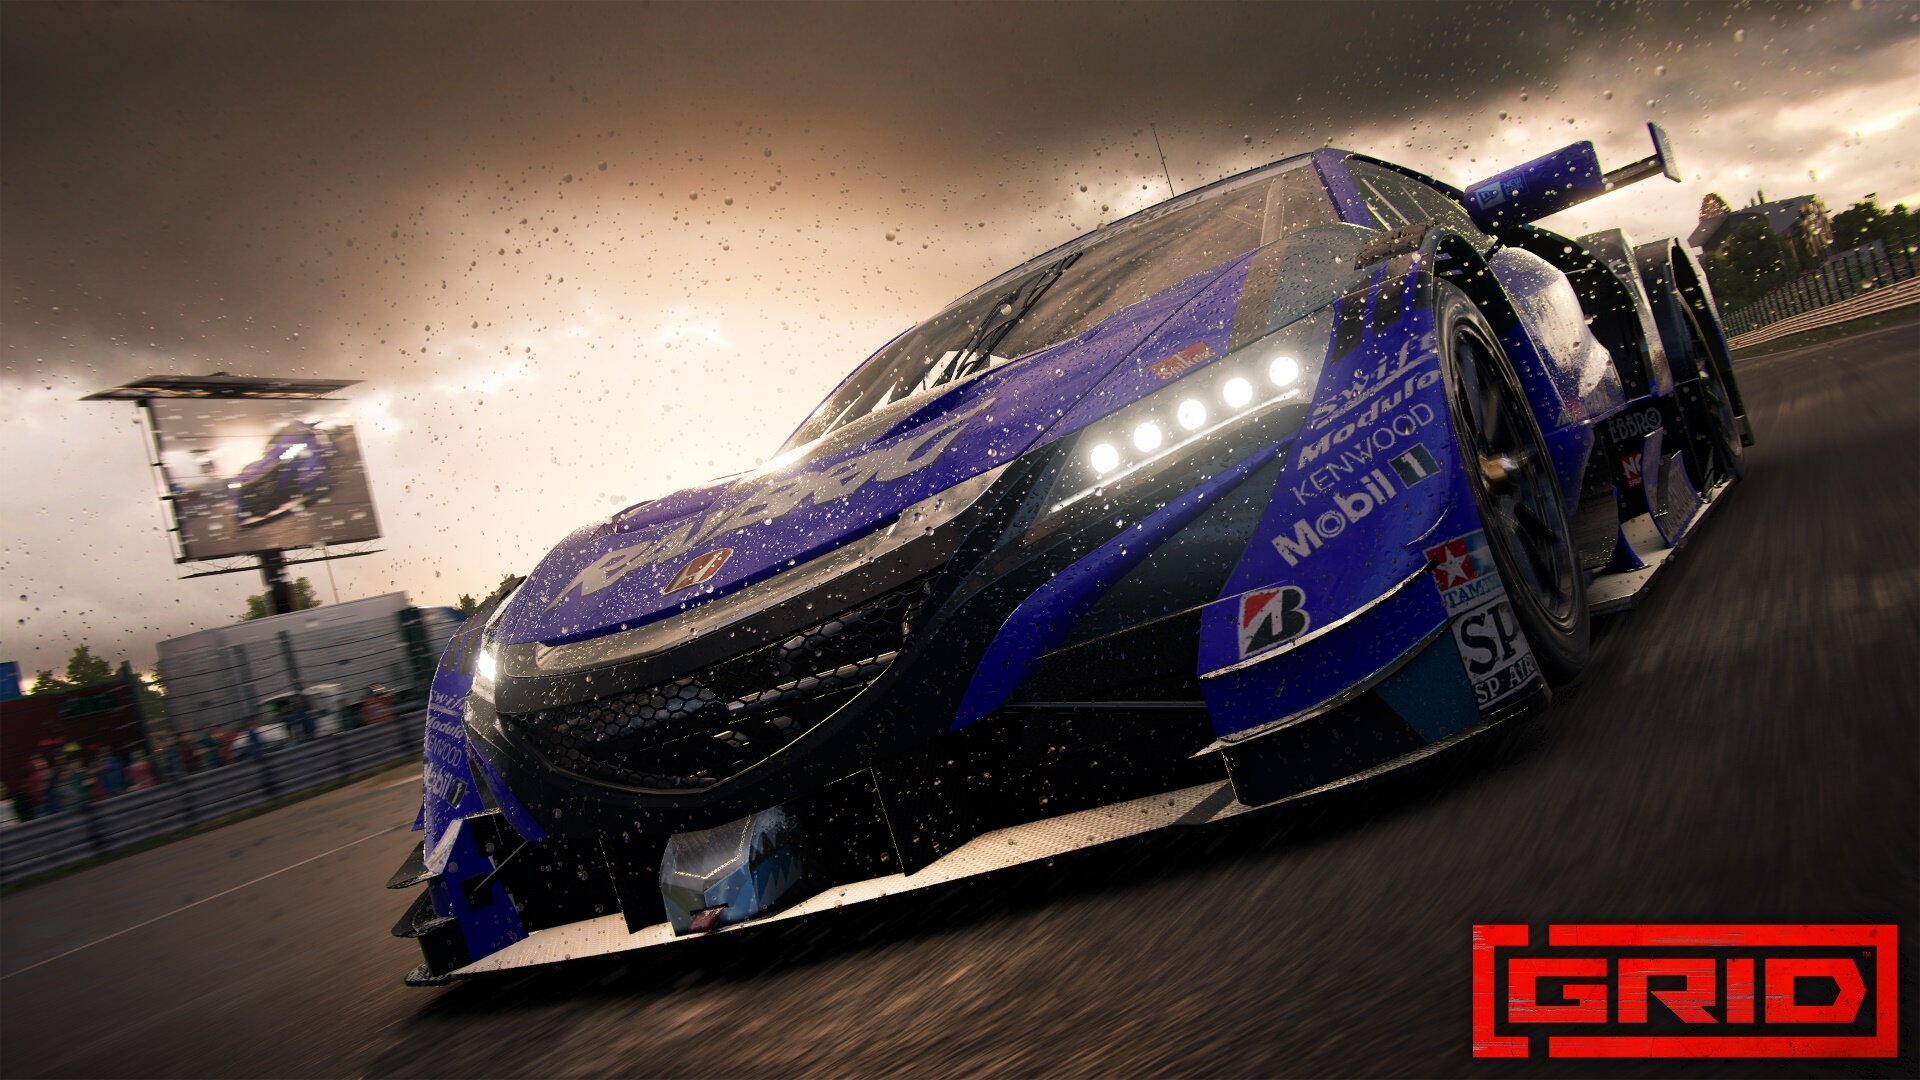 Grid Season 3 Adds 6 New Cars Suzuka Circuit New Achievements And More The Nobeds